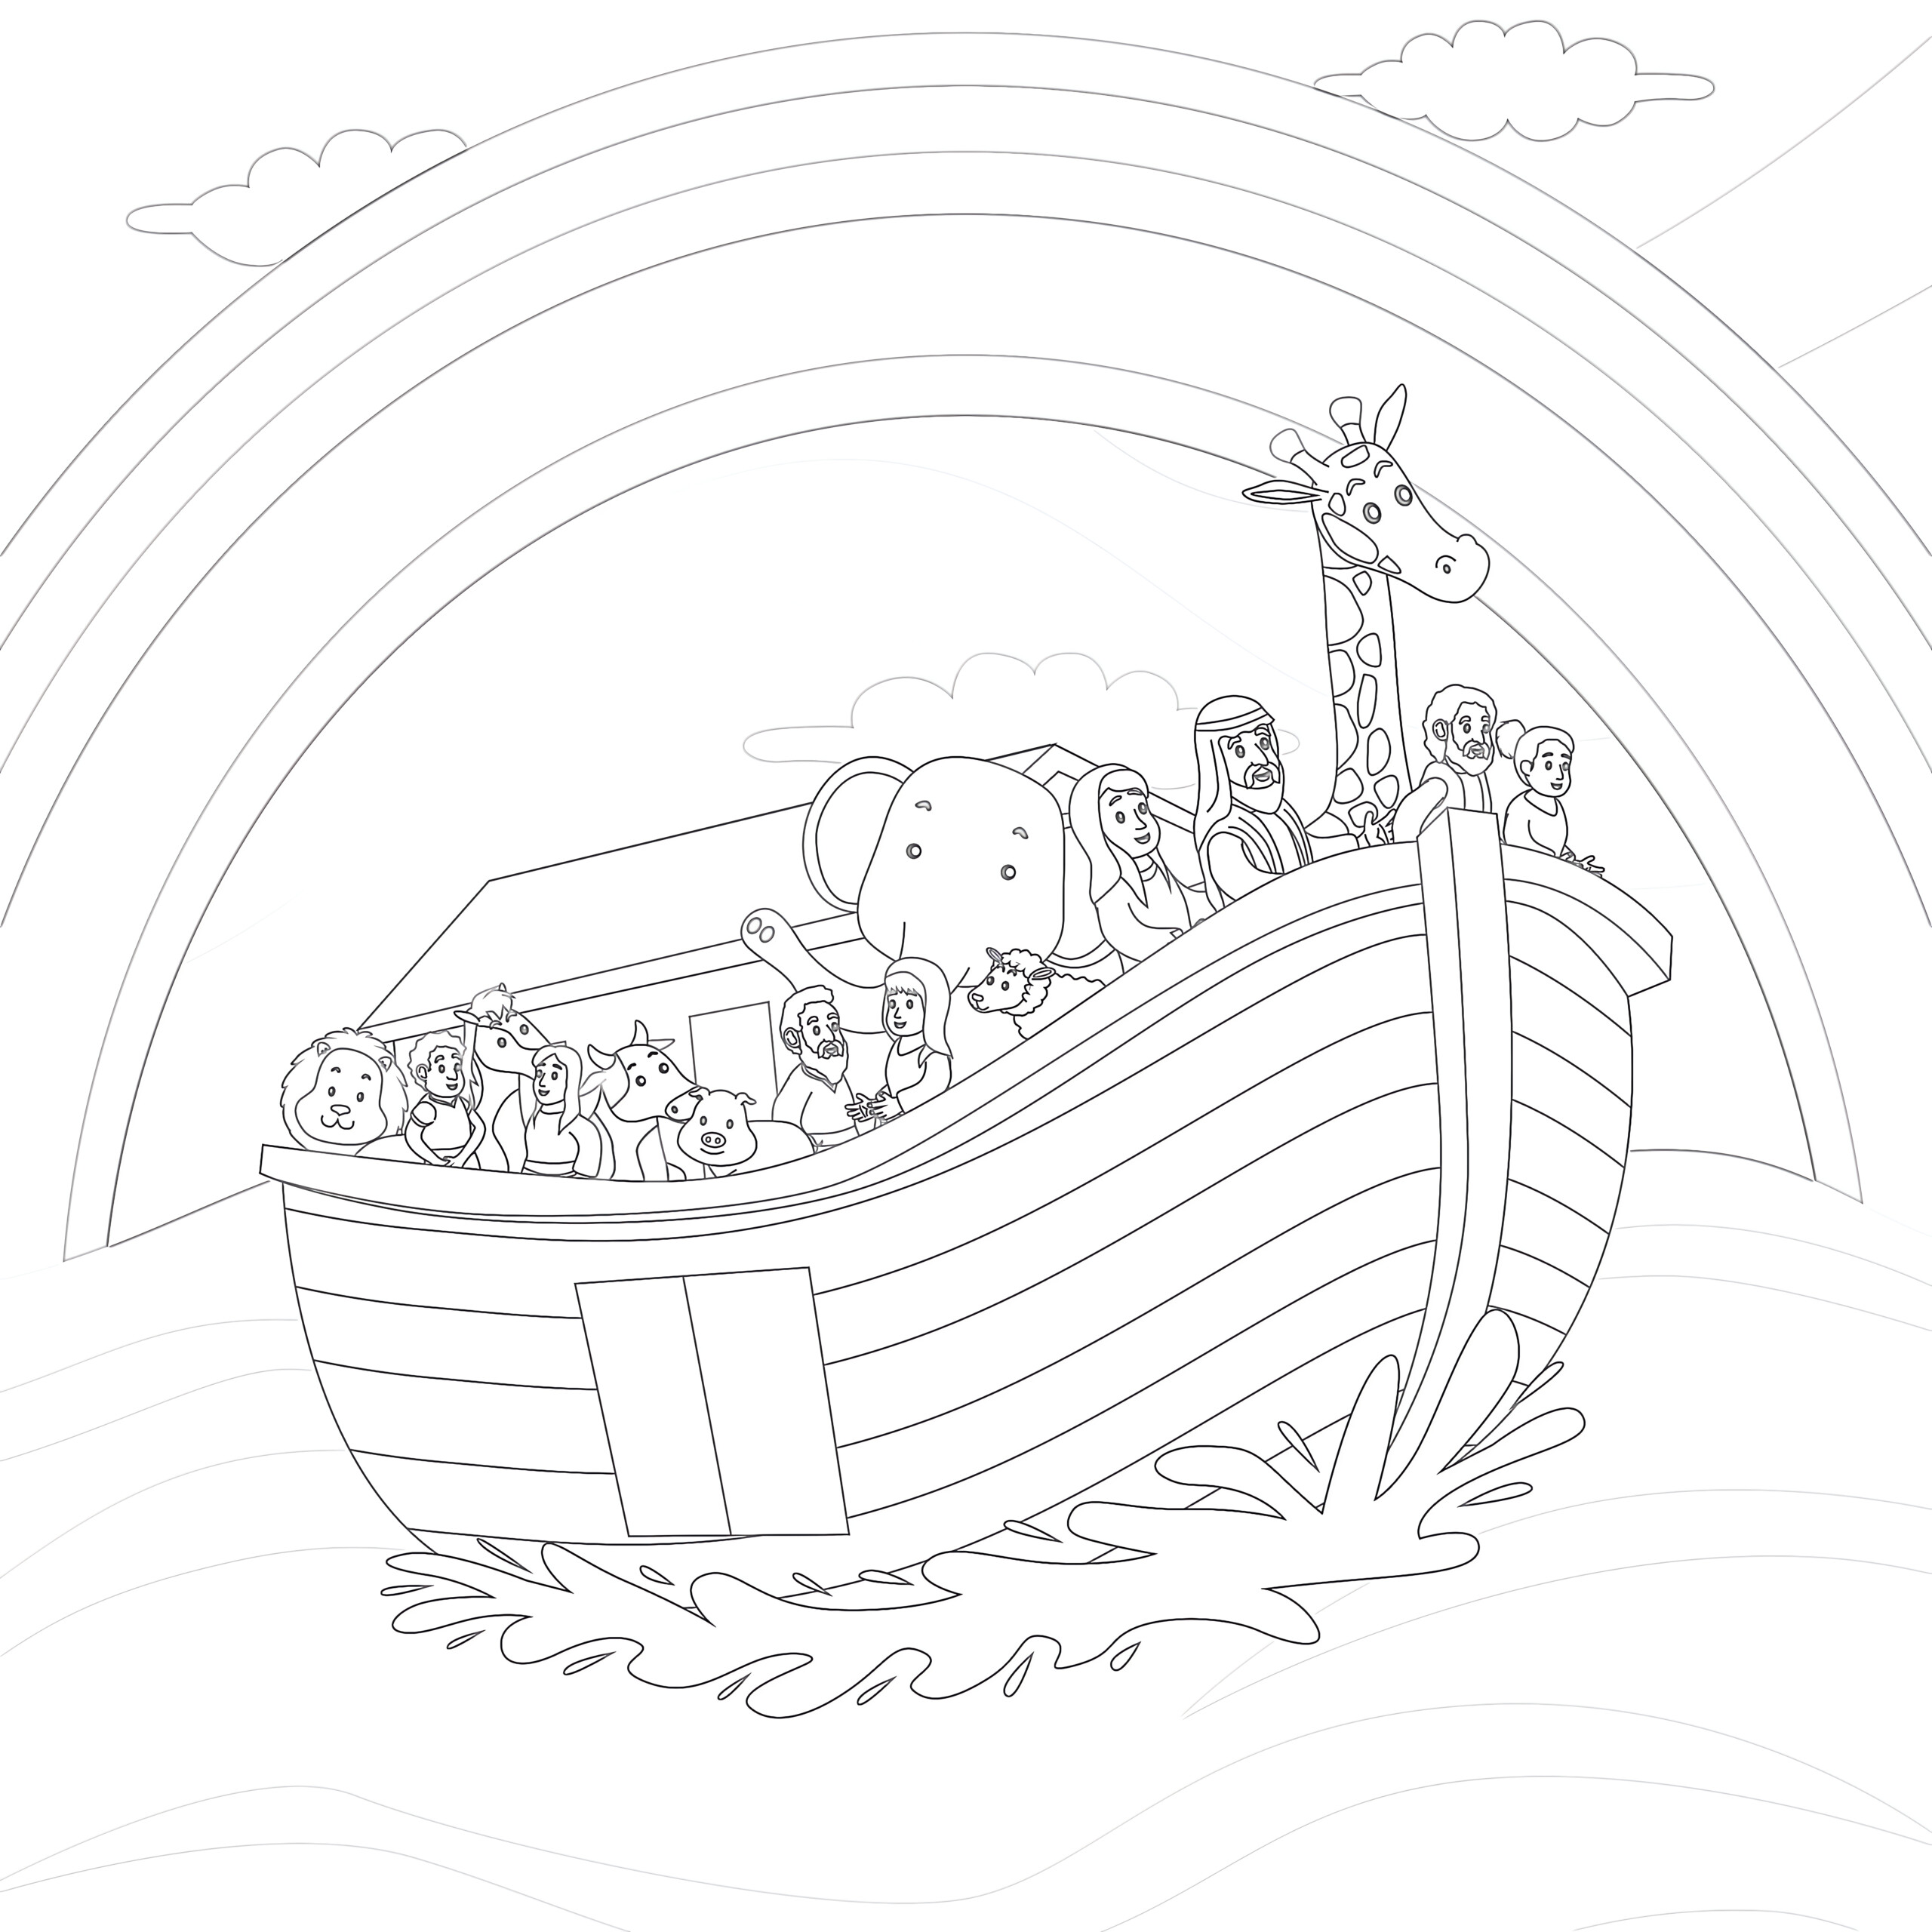 Printable noah and the ark coloring page